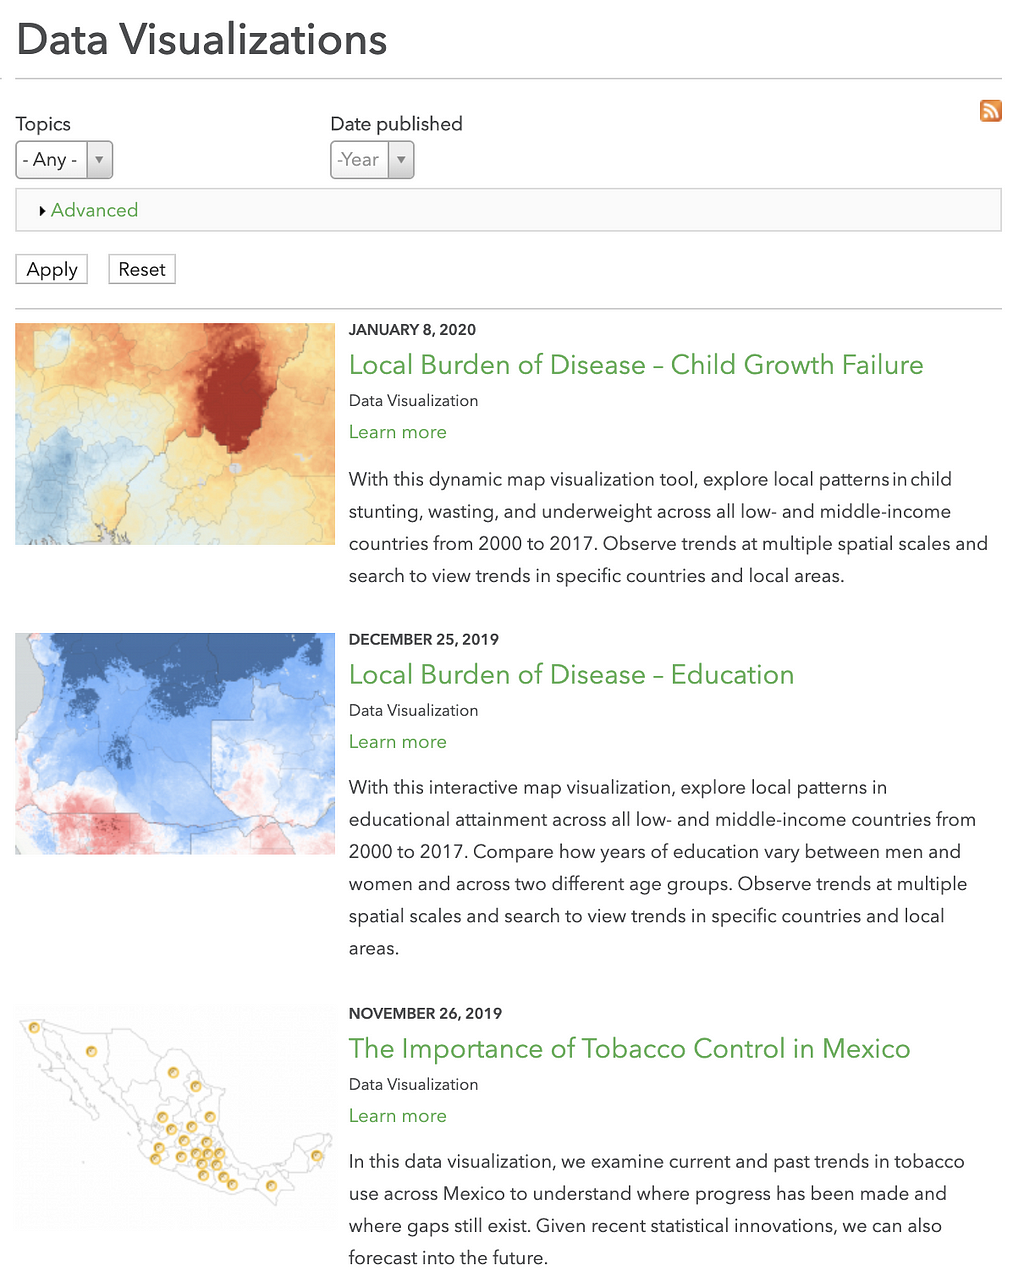 Data visualizations page at IHME